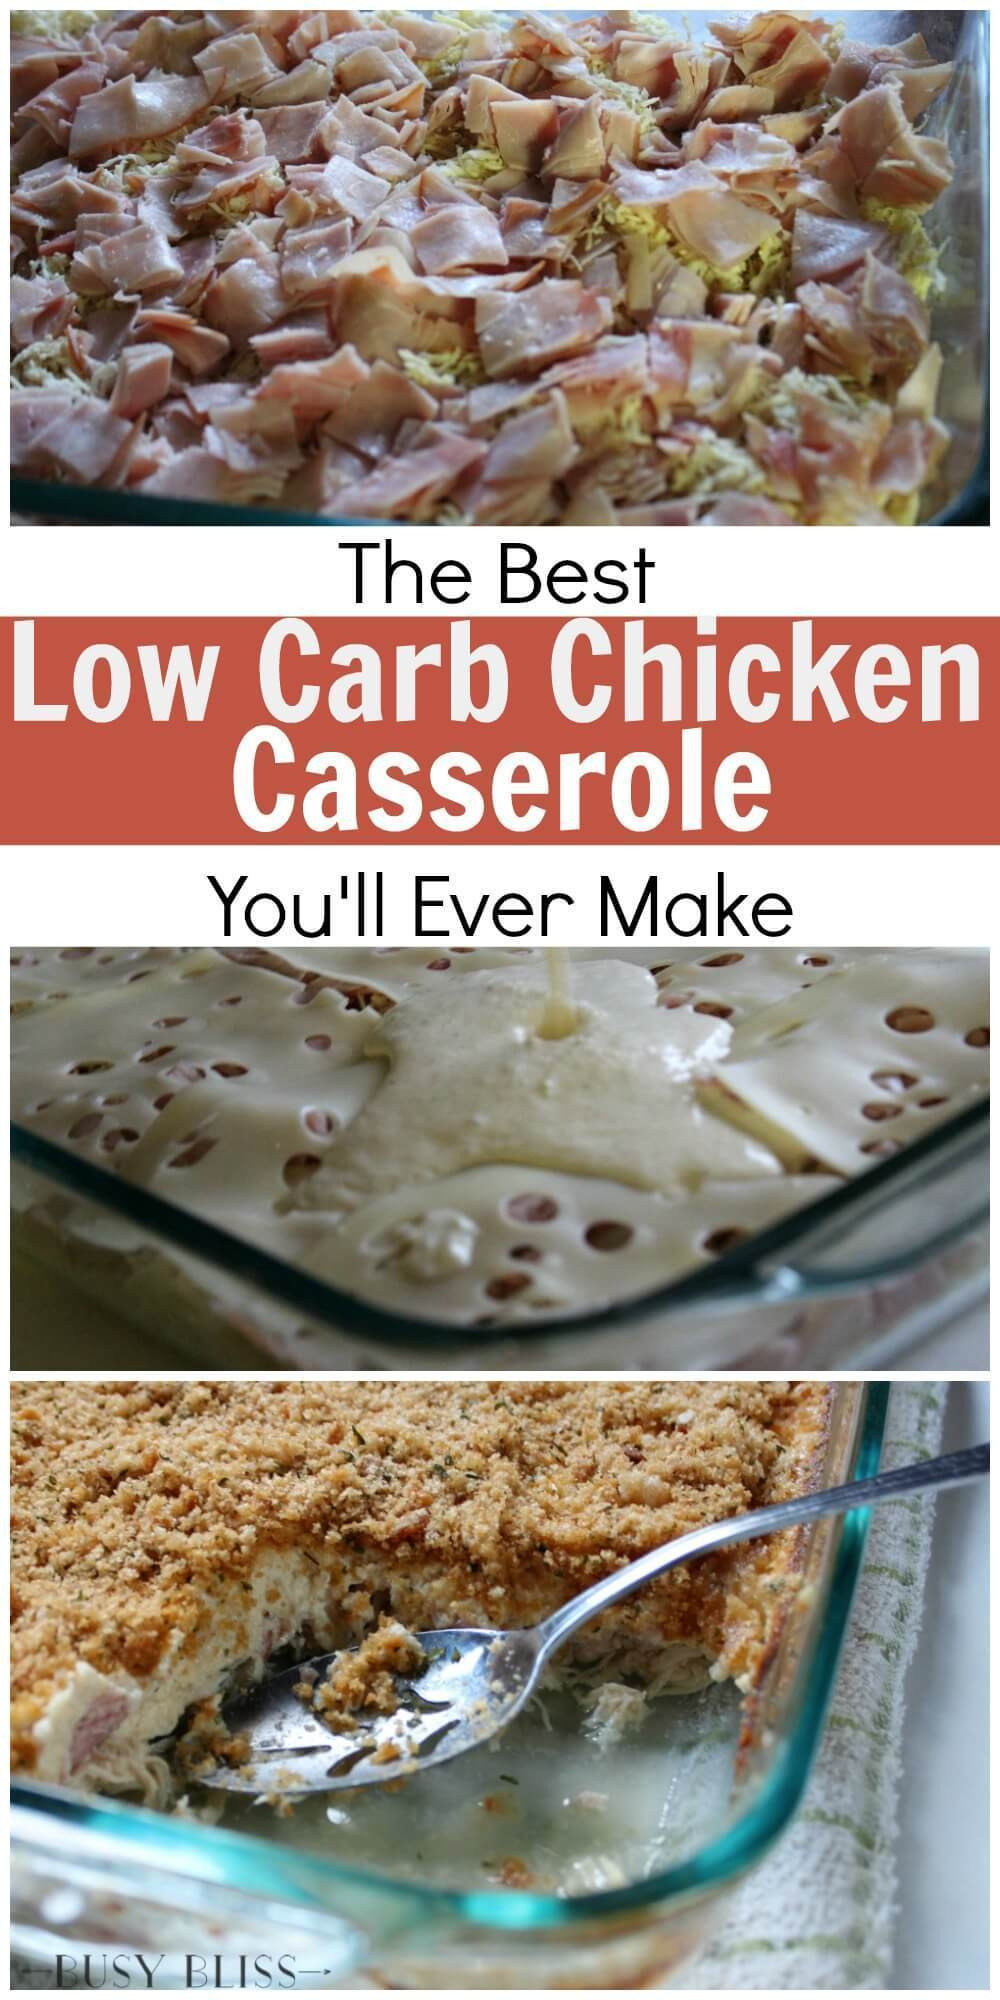 Best Low Carb Recipes Ever
 The Best Low Carb Chicken Casserole You ll Ever Make